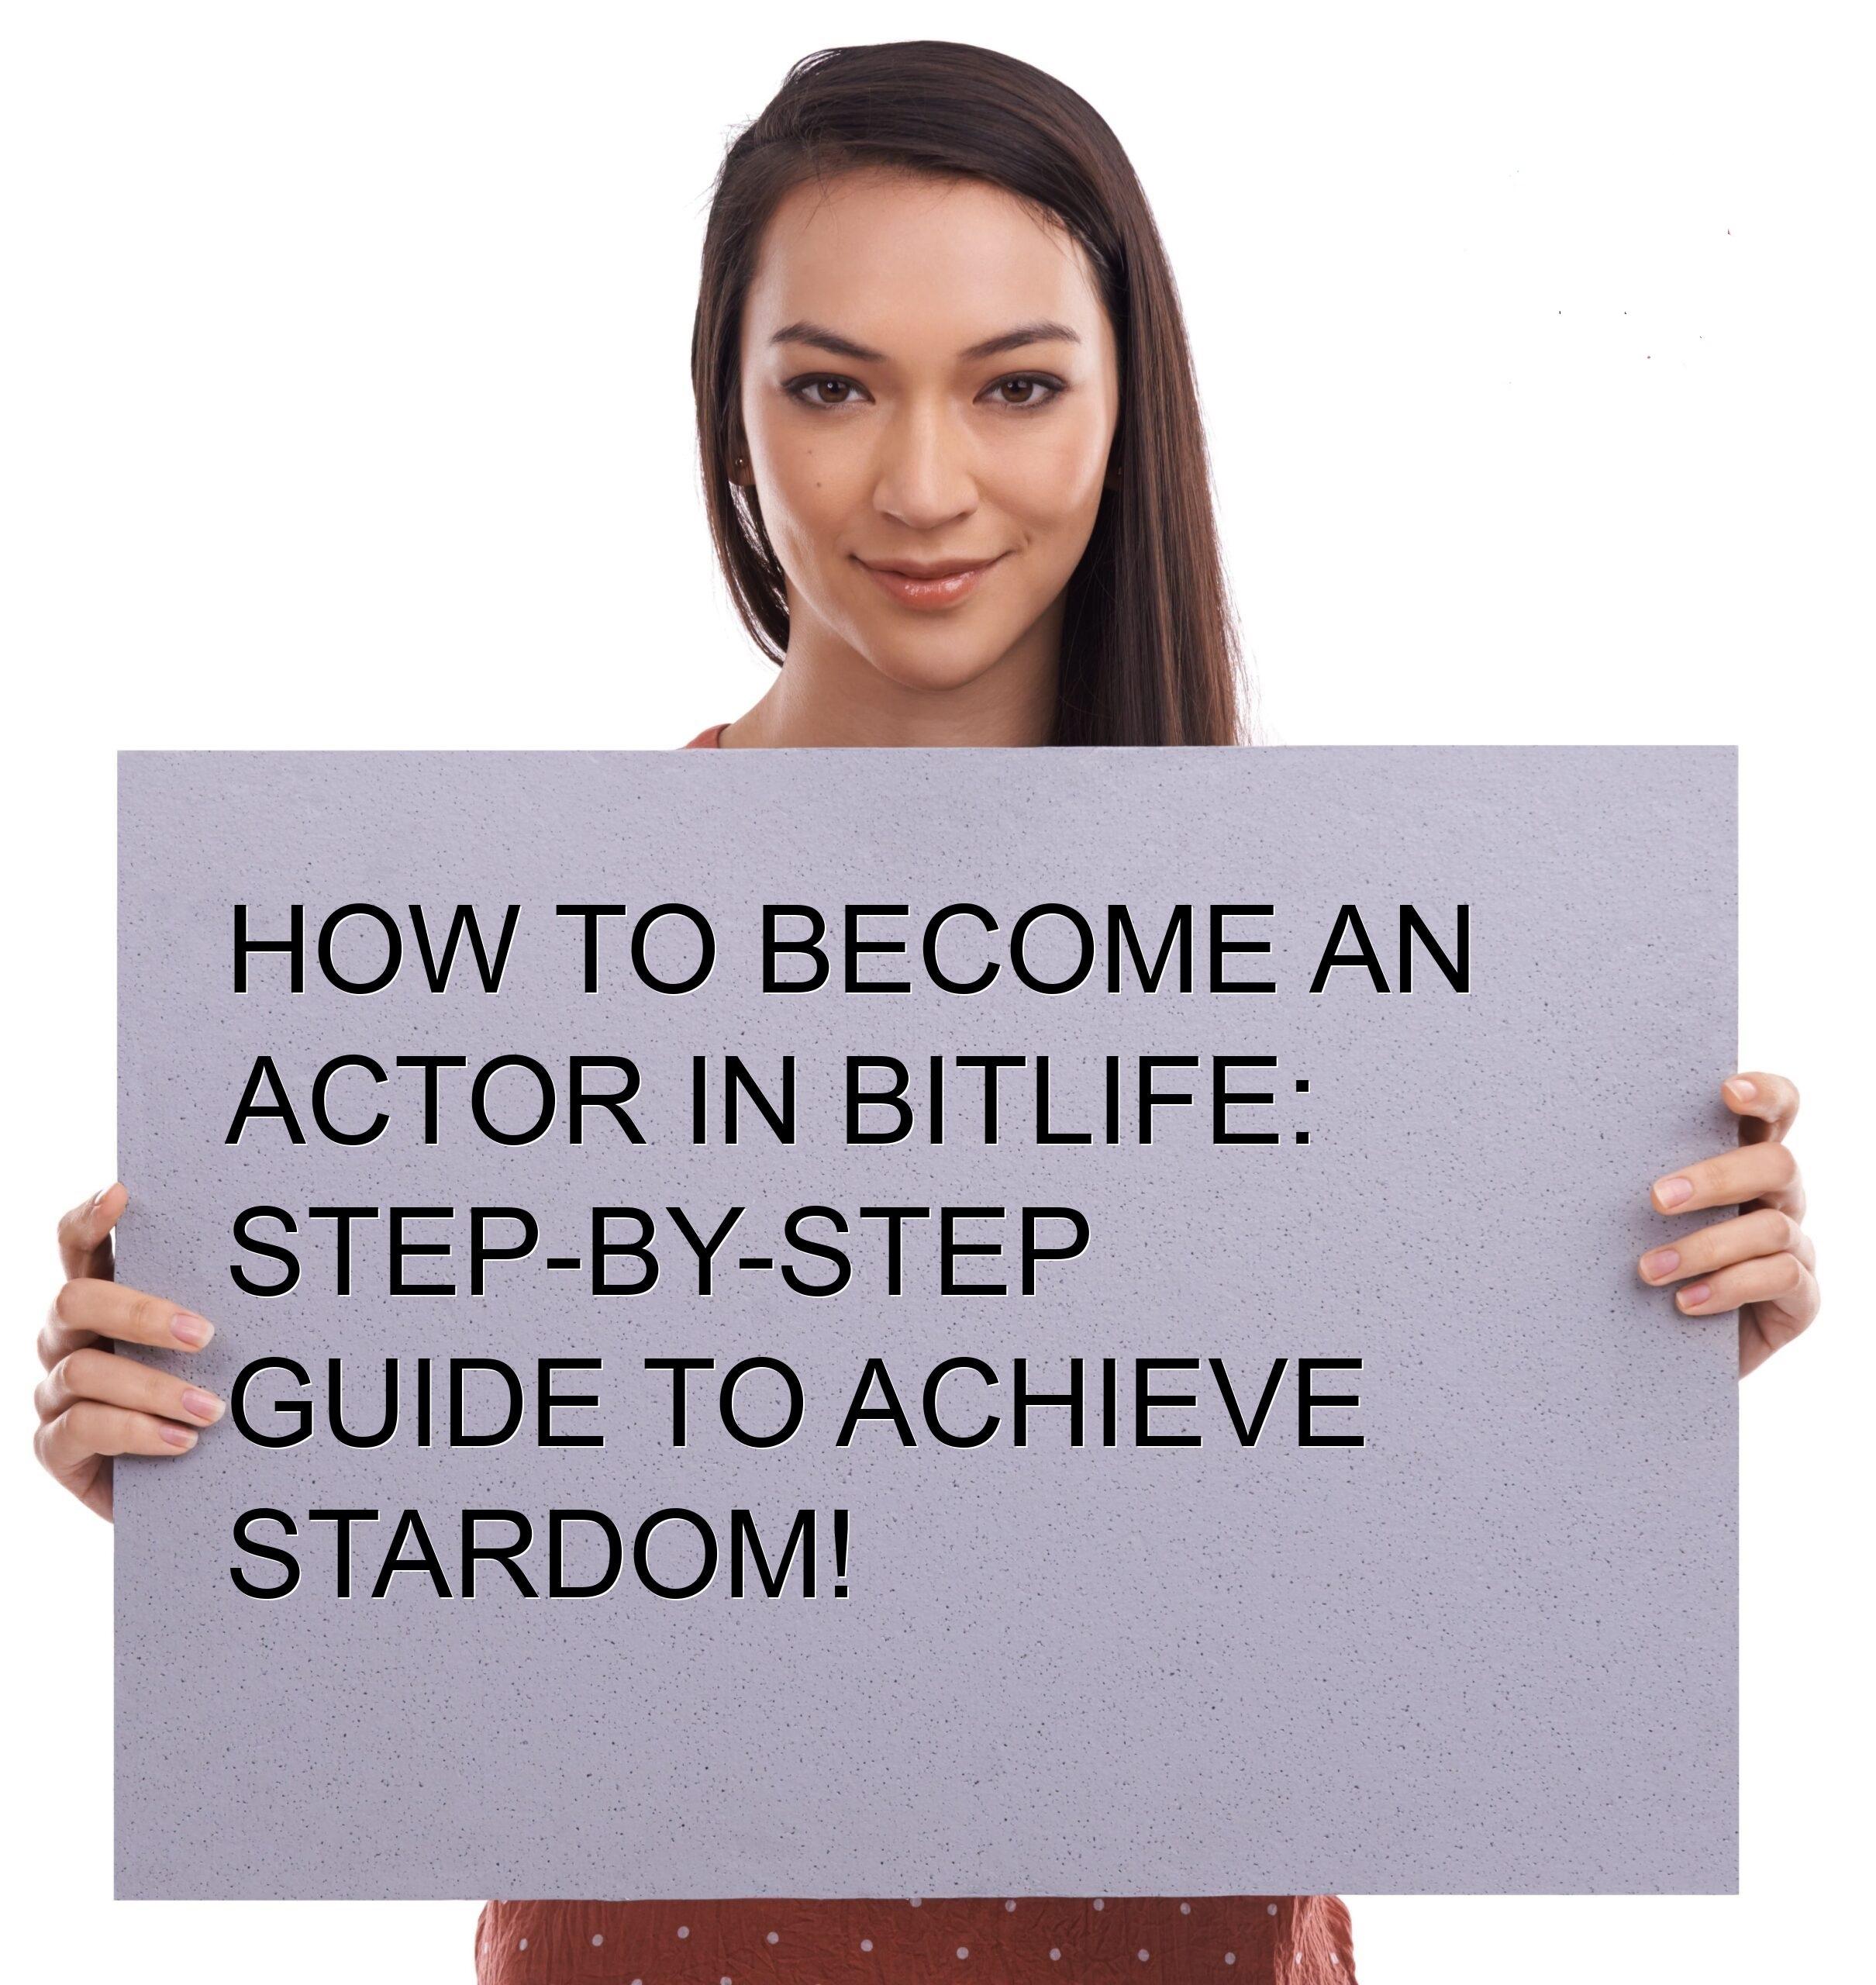 How to become an actor in Bitlife